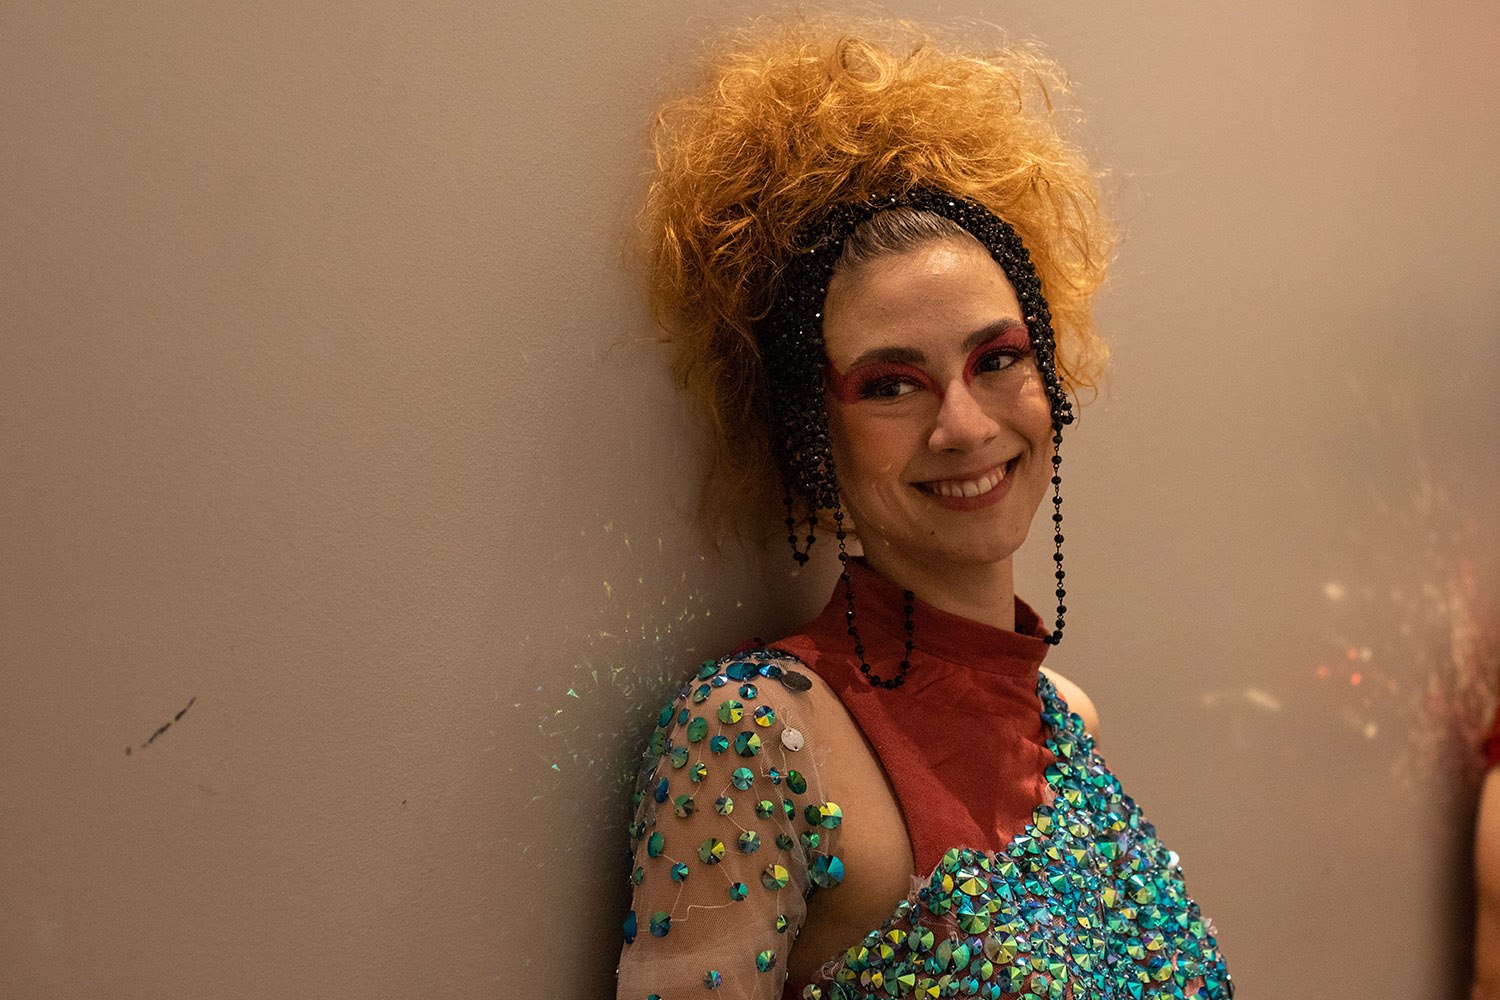 Cana Leonard waits backstage before the start of a fashion show at the WEBB Party on Friday night, April 1, 2022, at the Aztec Theater in downtown San Antonio, Texas. Photo by Kaylee Greenlee Beal | Heron contributor